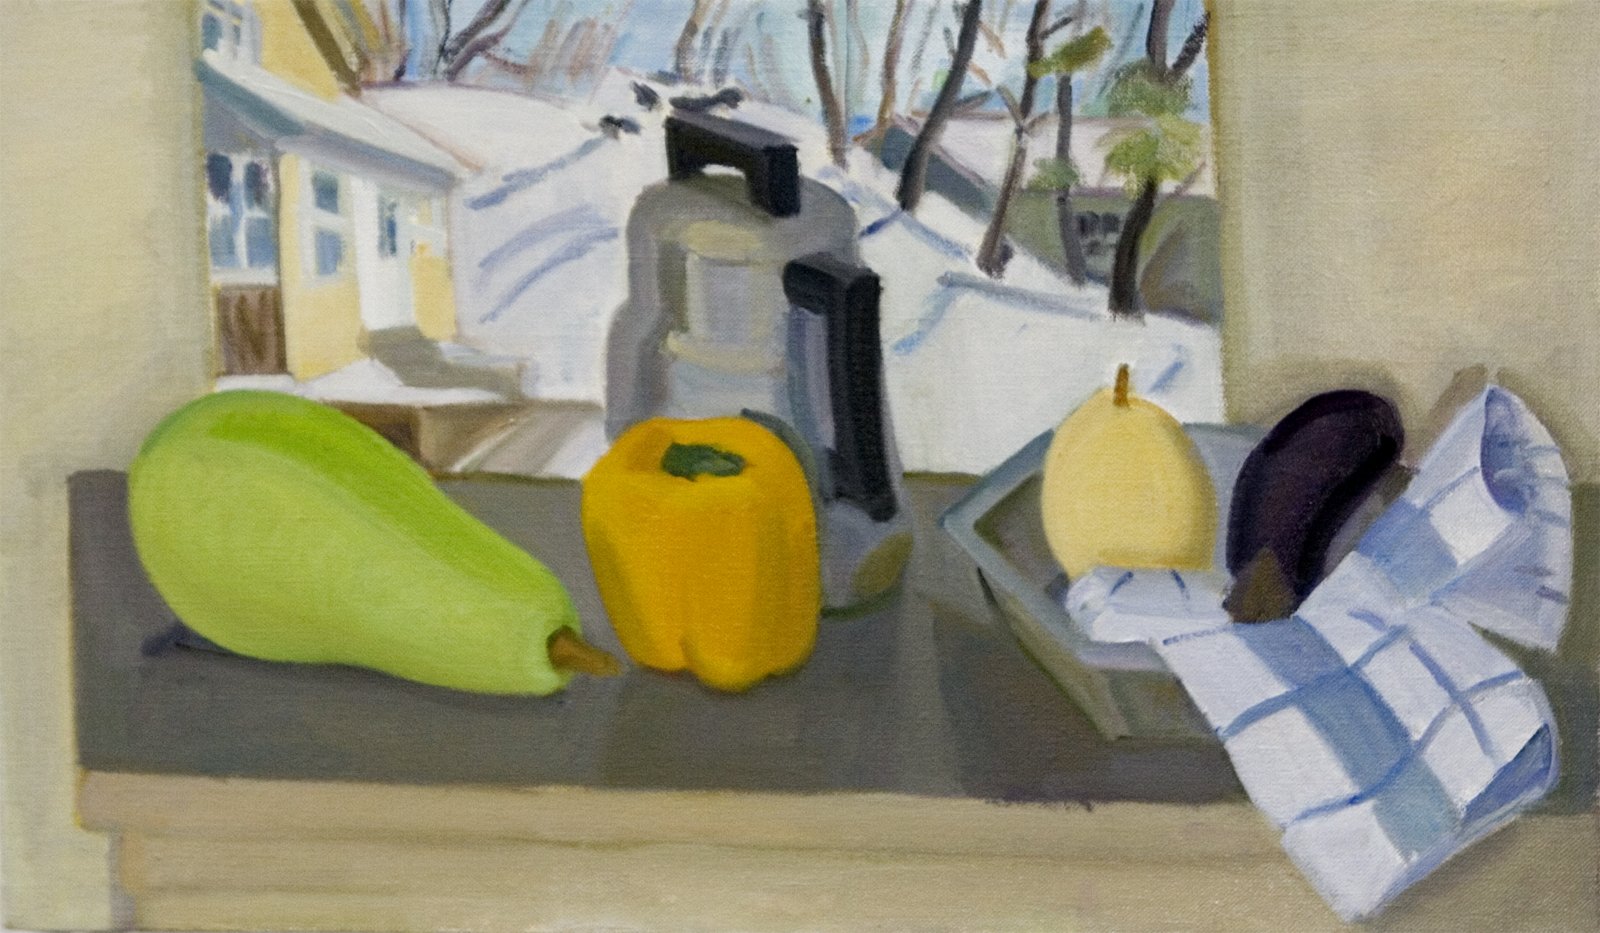   Checkered Cloth with Coffee Pot, Winter Landscap e, 2009, oil/panel, 13 x 22 in. (Not for sale) 